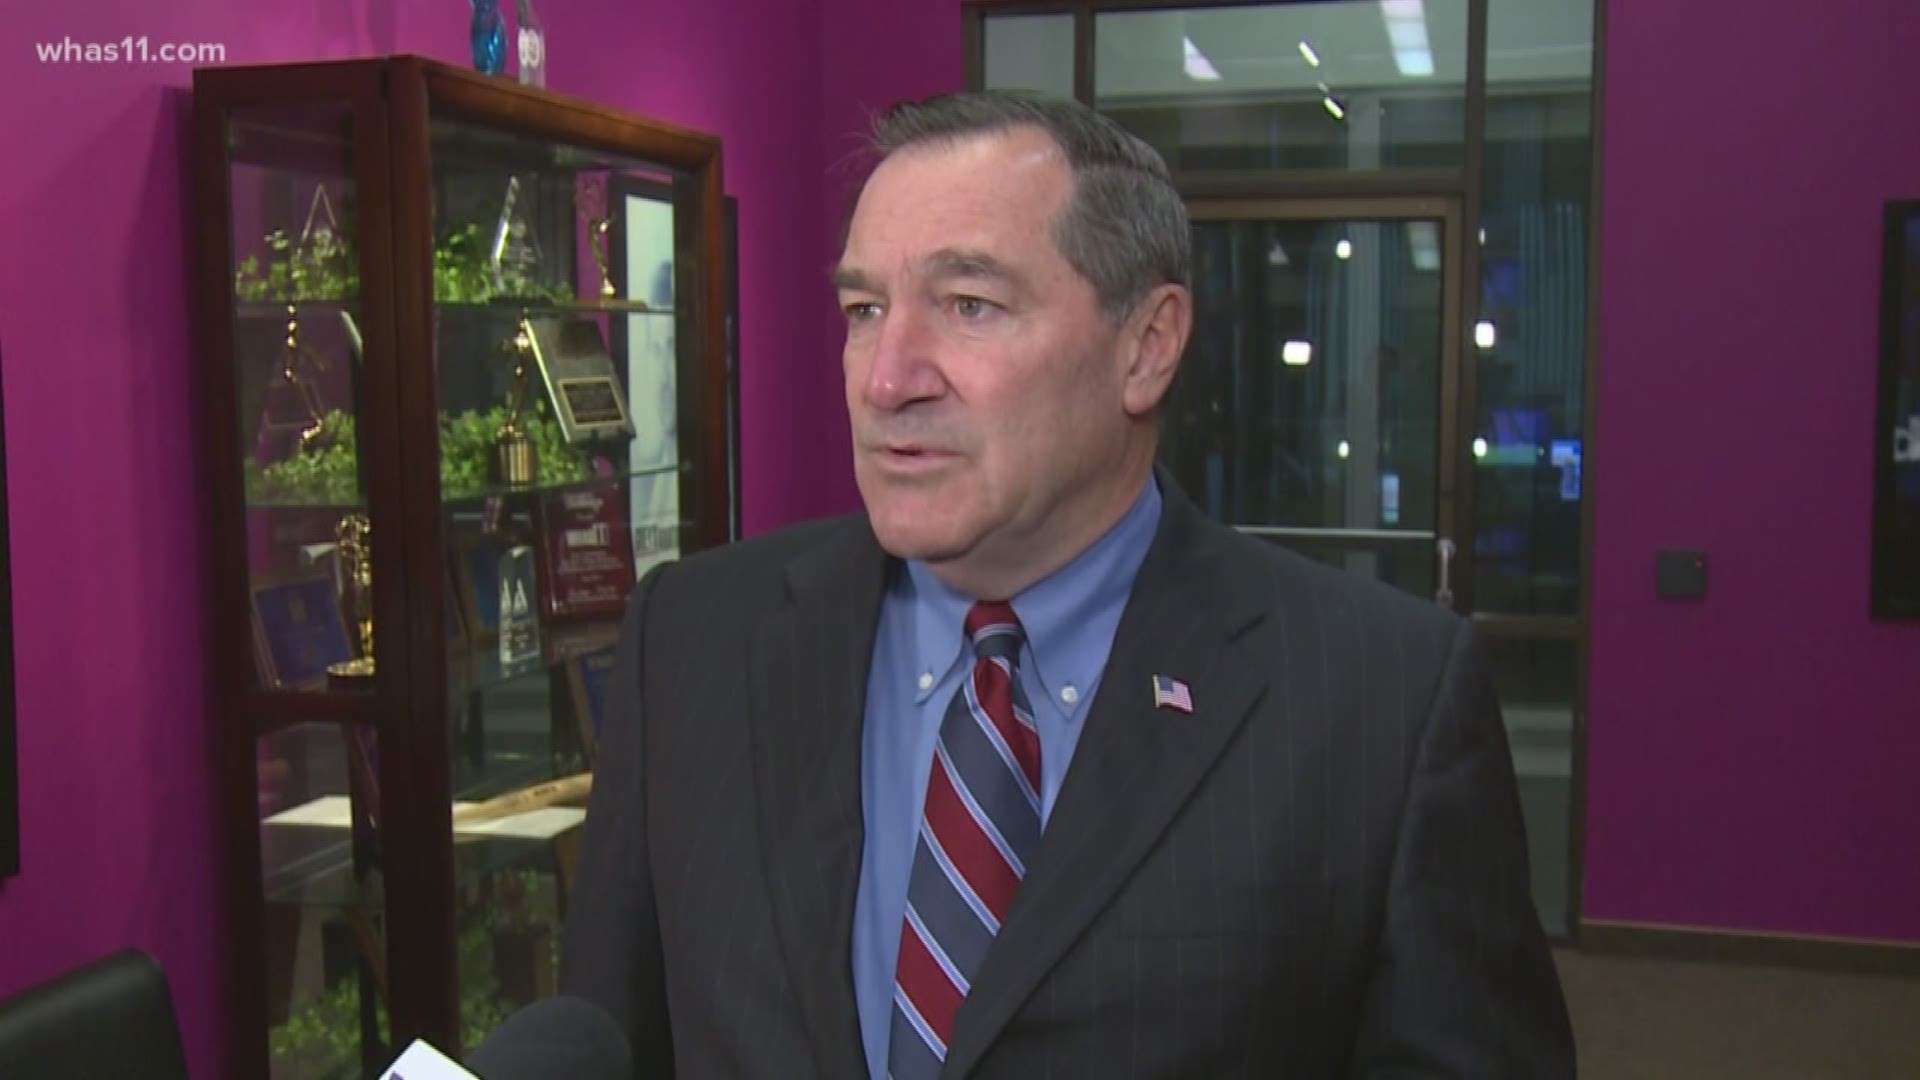 Senator Donnelly said claims by the President of Turkey that Jamal Khashoggi's murder was planned should be a reason for President Trump to reconsider how the U.S. responds.